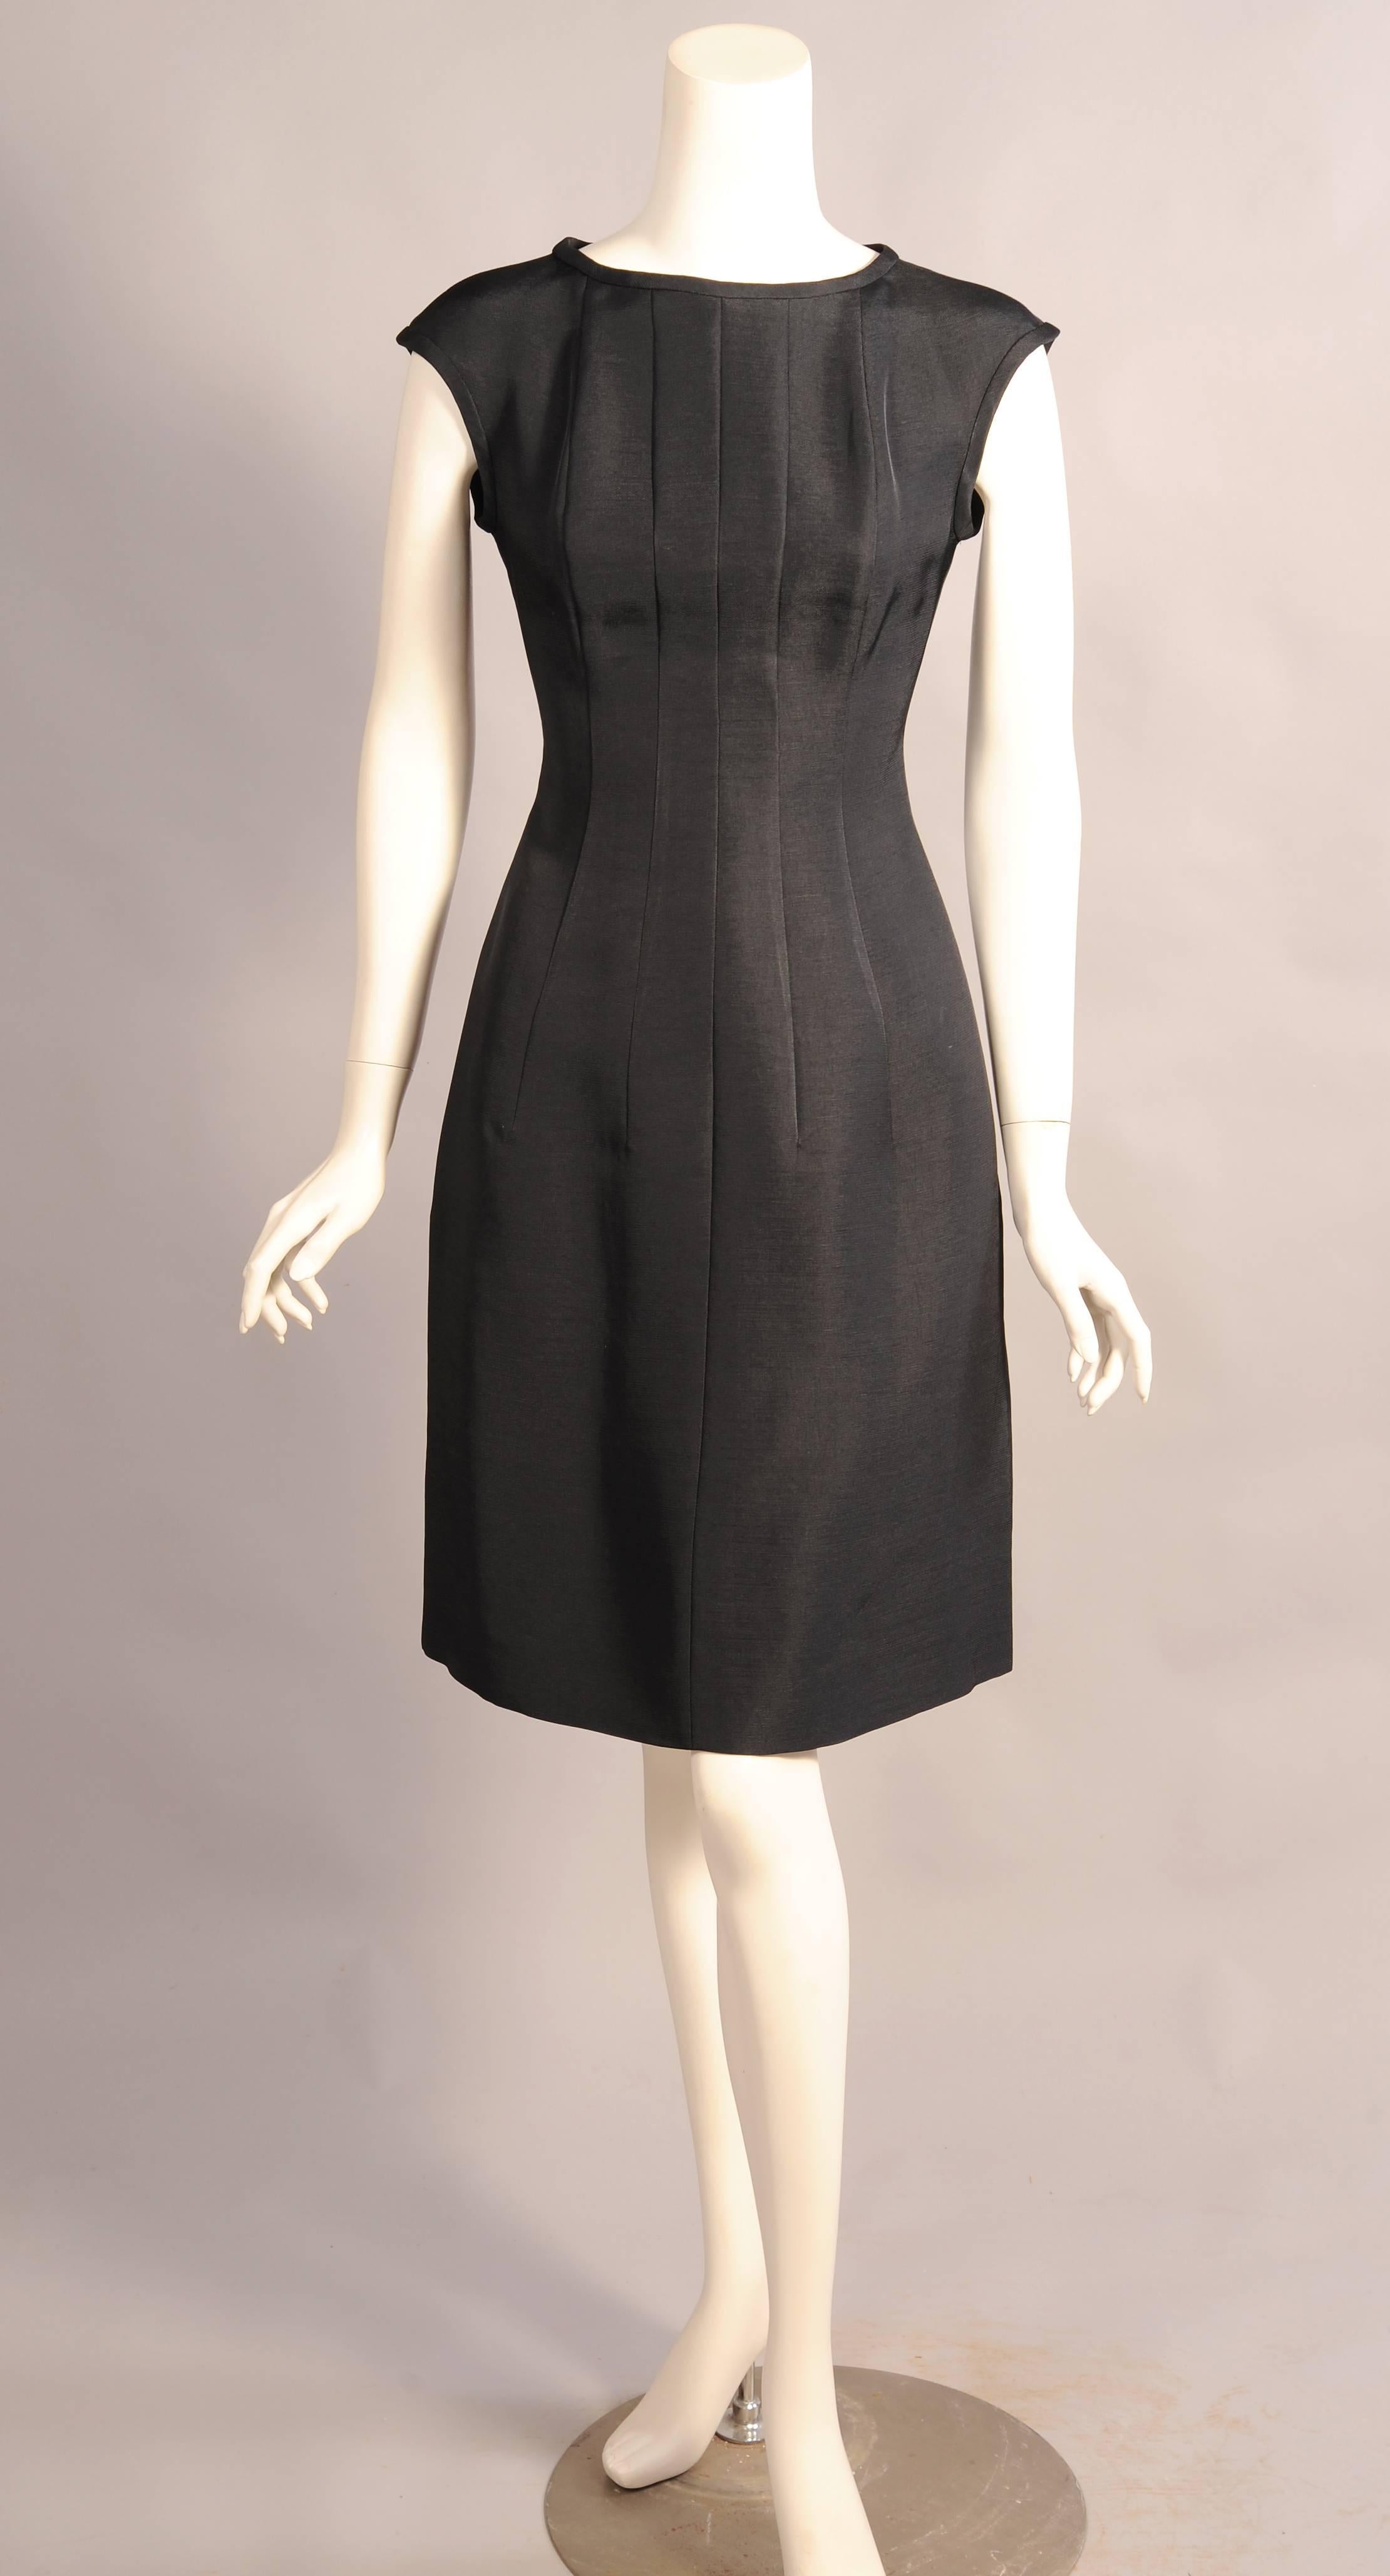 Karl Lagerfeld has designed this dress with five vertical seams on the front to insure a perfect fit. The dress has a bound neckline and armholes and there are pockets concealed in the side seams. The back of the dress has two vertical seams on